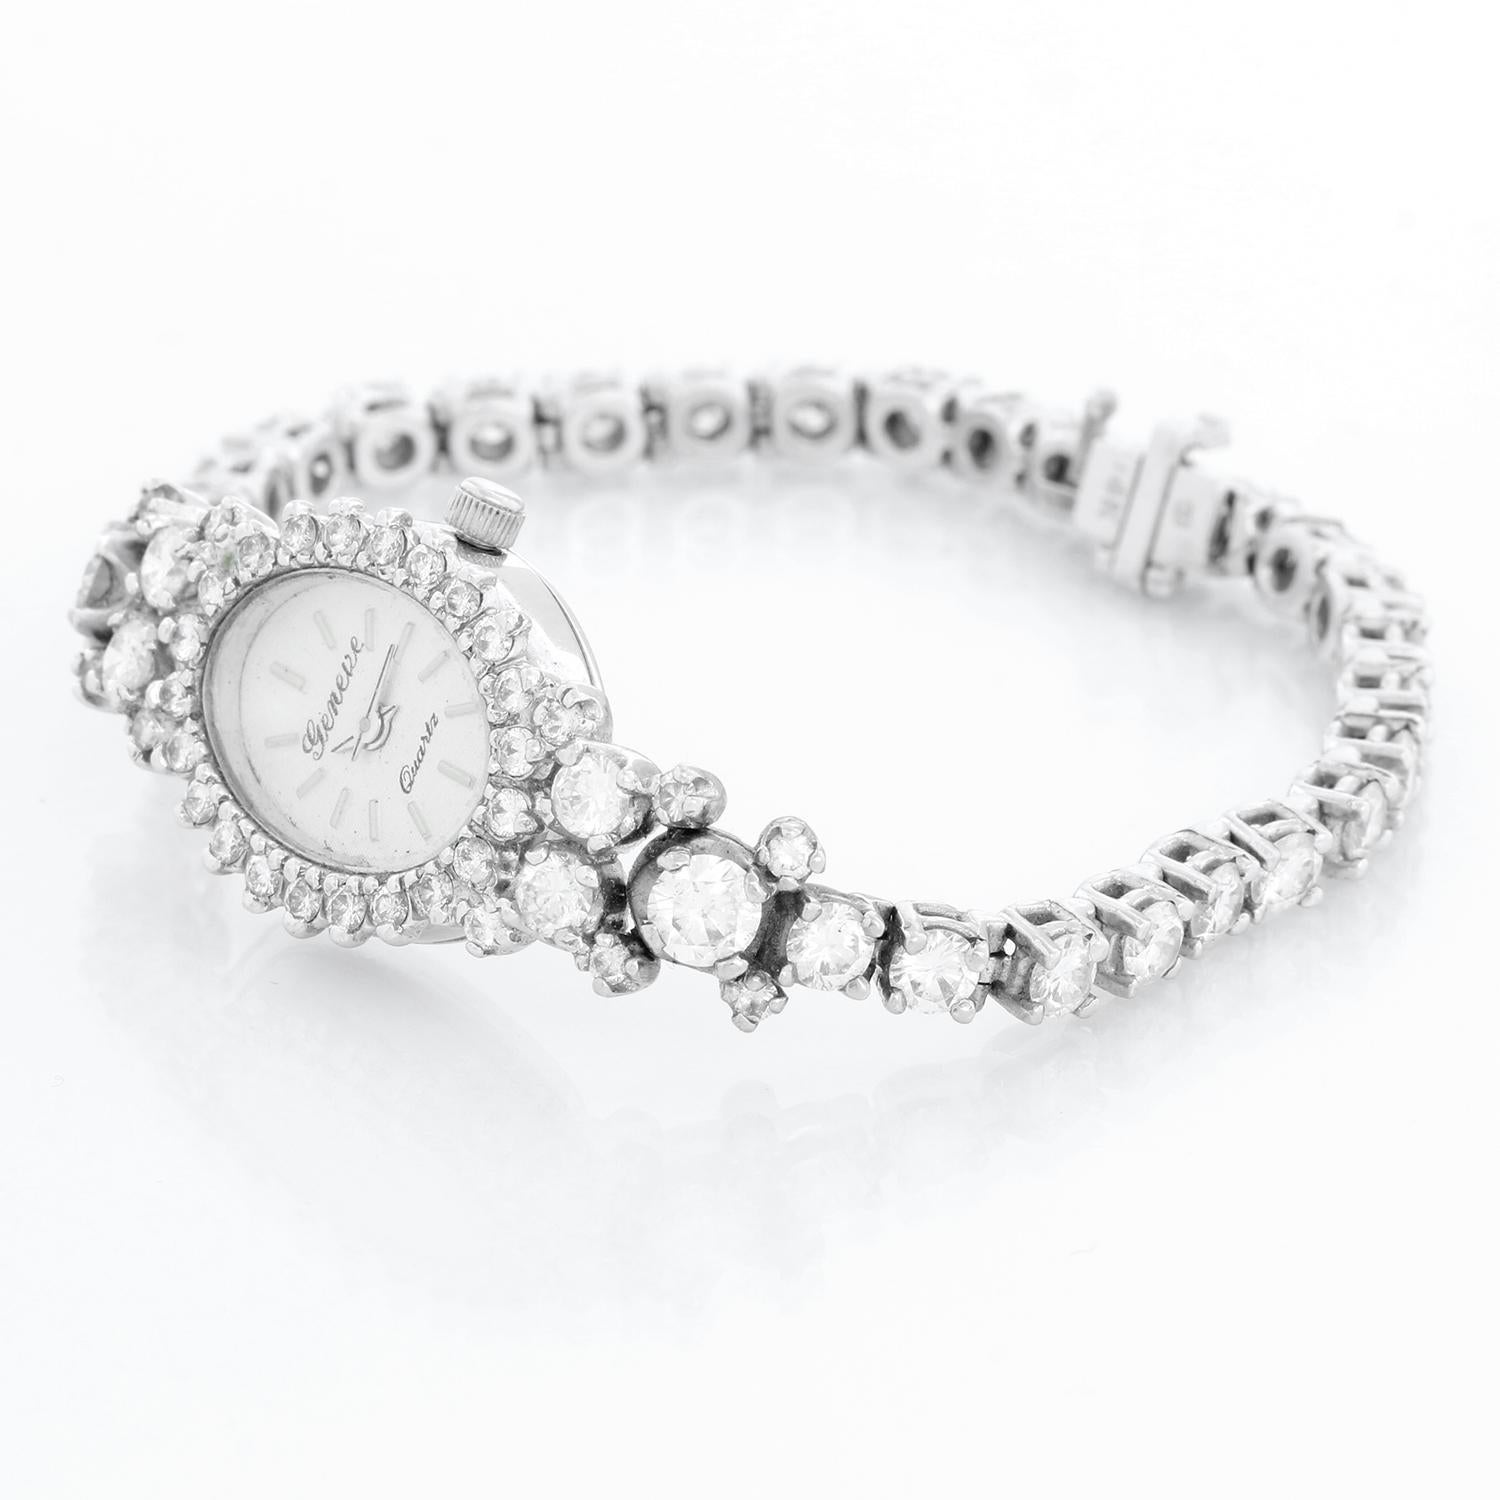 Geneve Vintage Diamond 14K White Gold Ladies Watch - Quartz . 14K White Gold (15 x 27 mm). Silver dial with silver raised baton markers. Diamond Tennis bracelet; will fit up to a 5 1/2 inch wrist . Pre-owned with custom box.